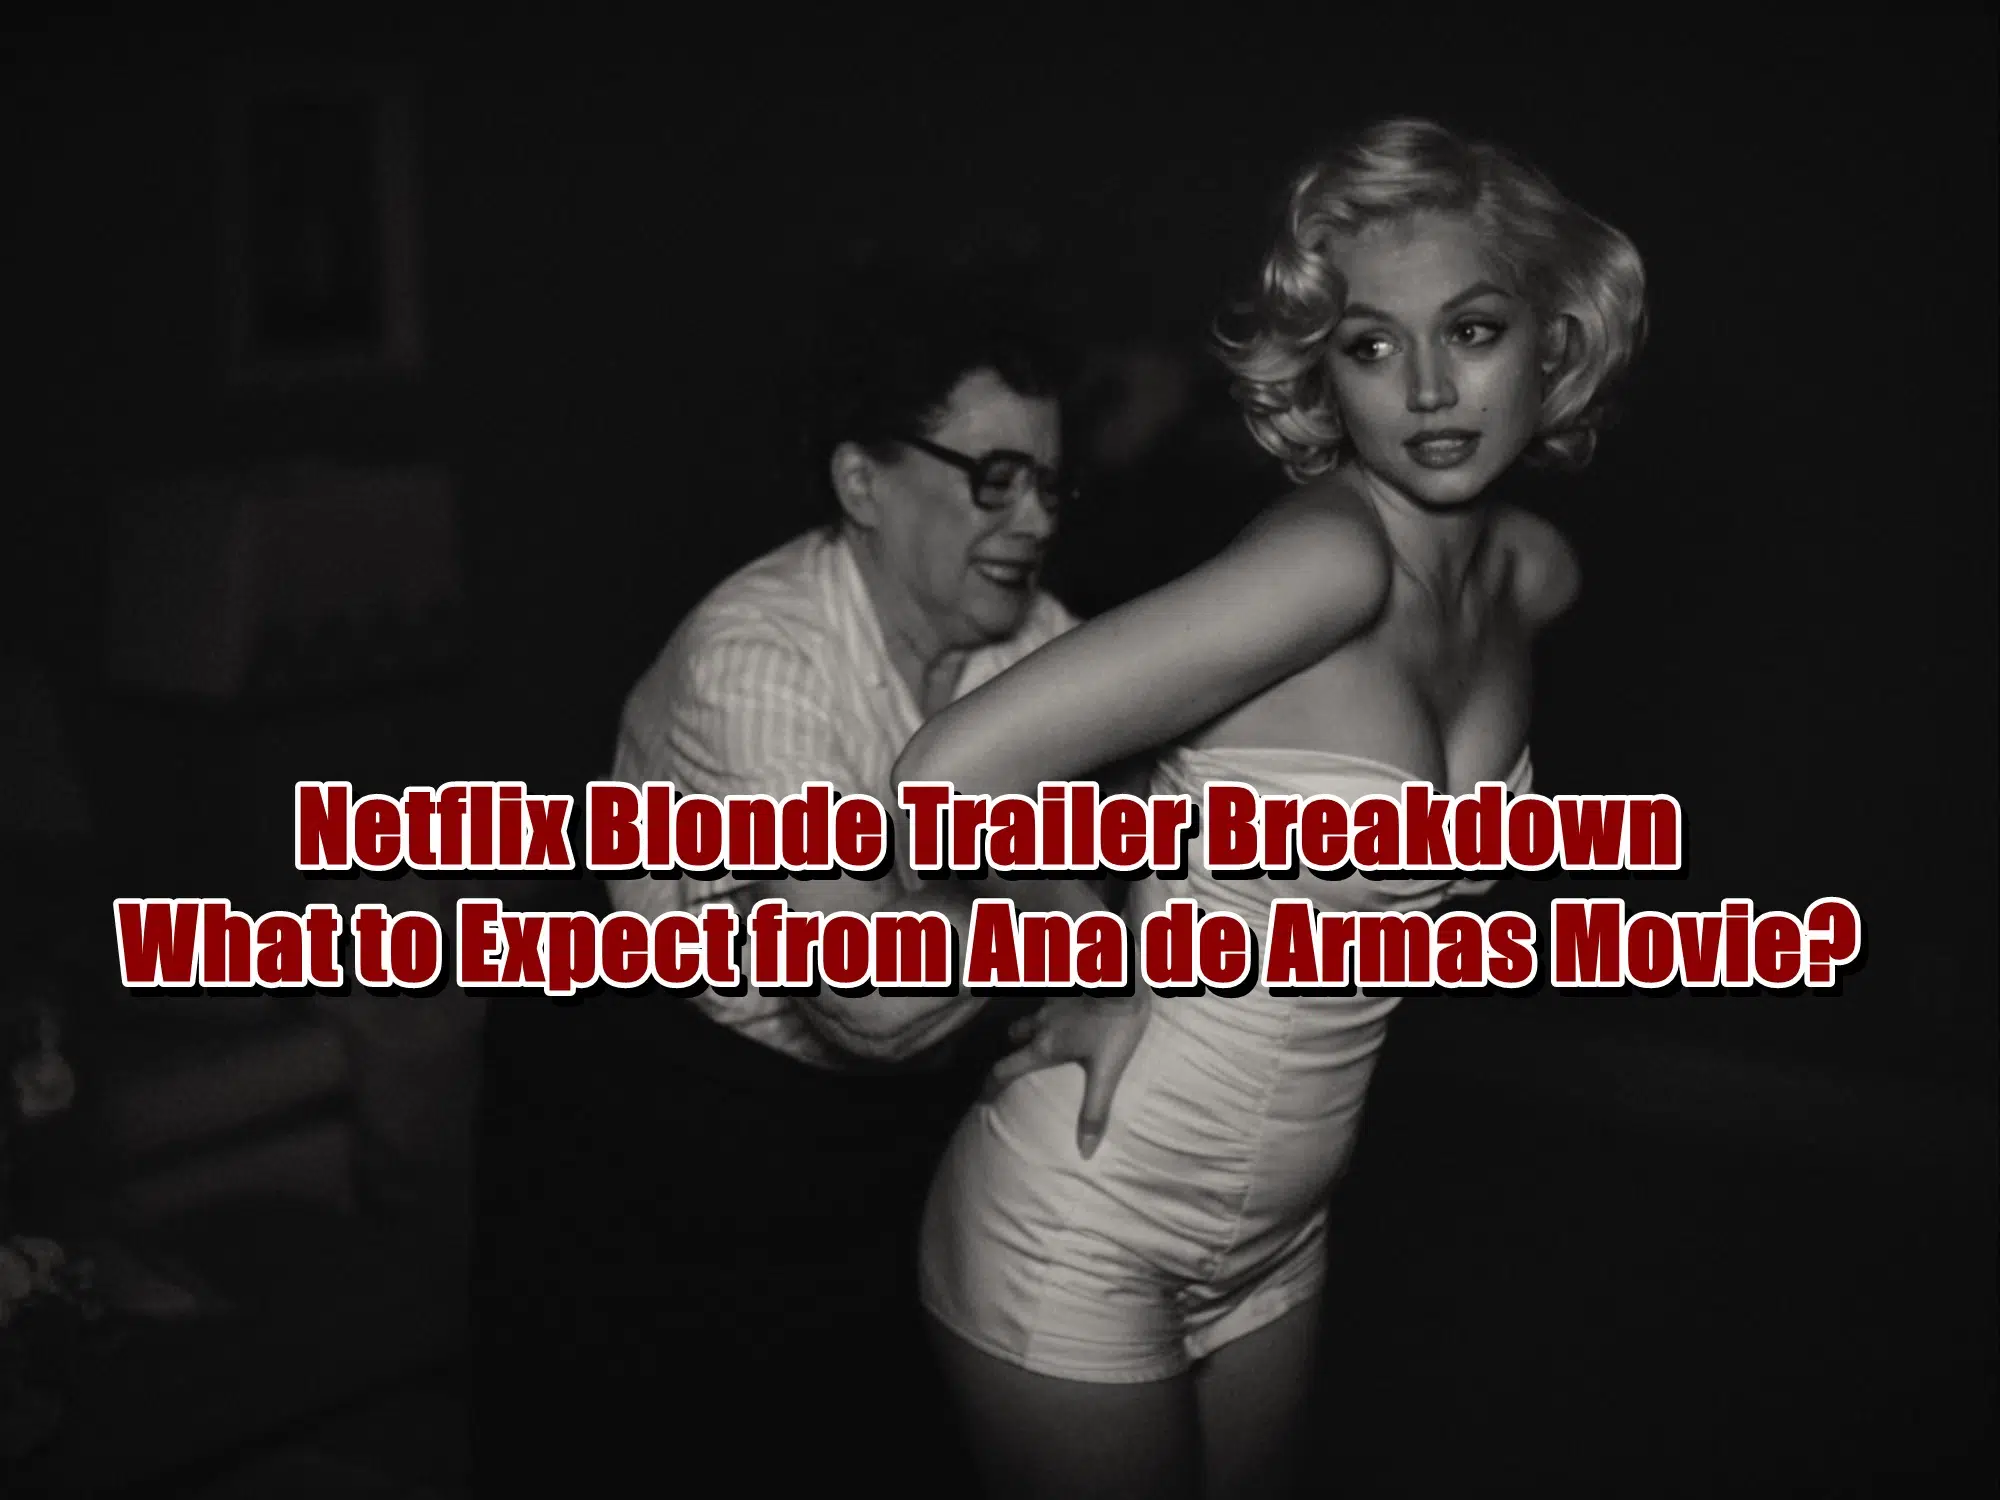 Netflix Blonde Trailer Breakdown - What to Expect from Ana de Armas Movie